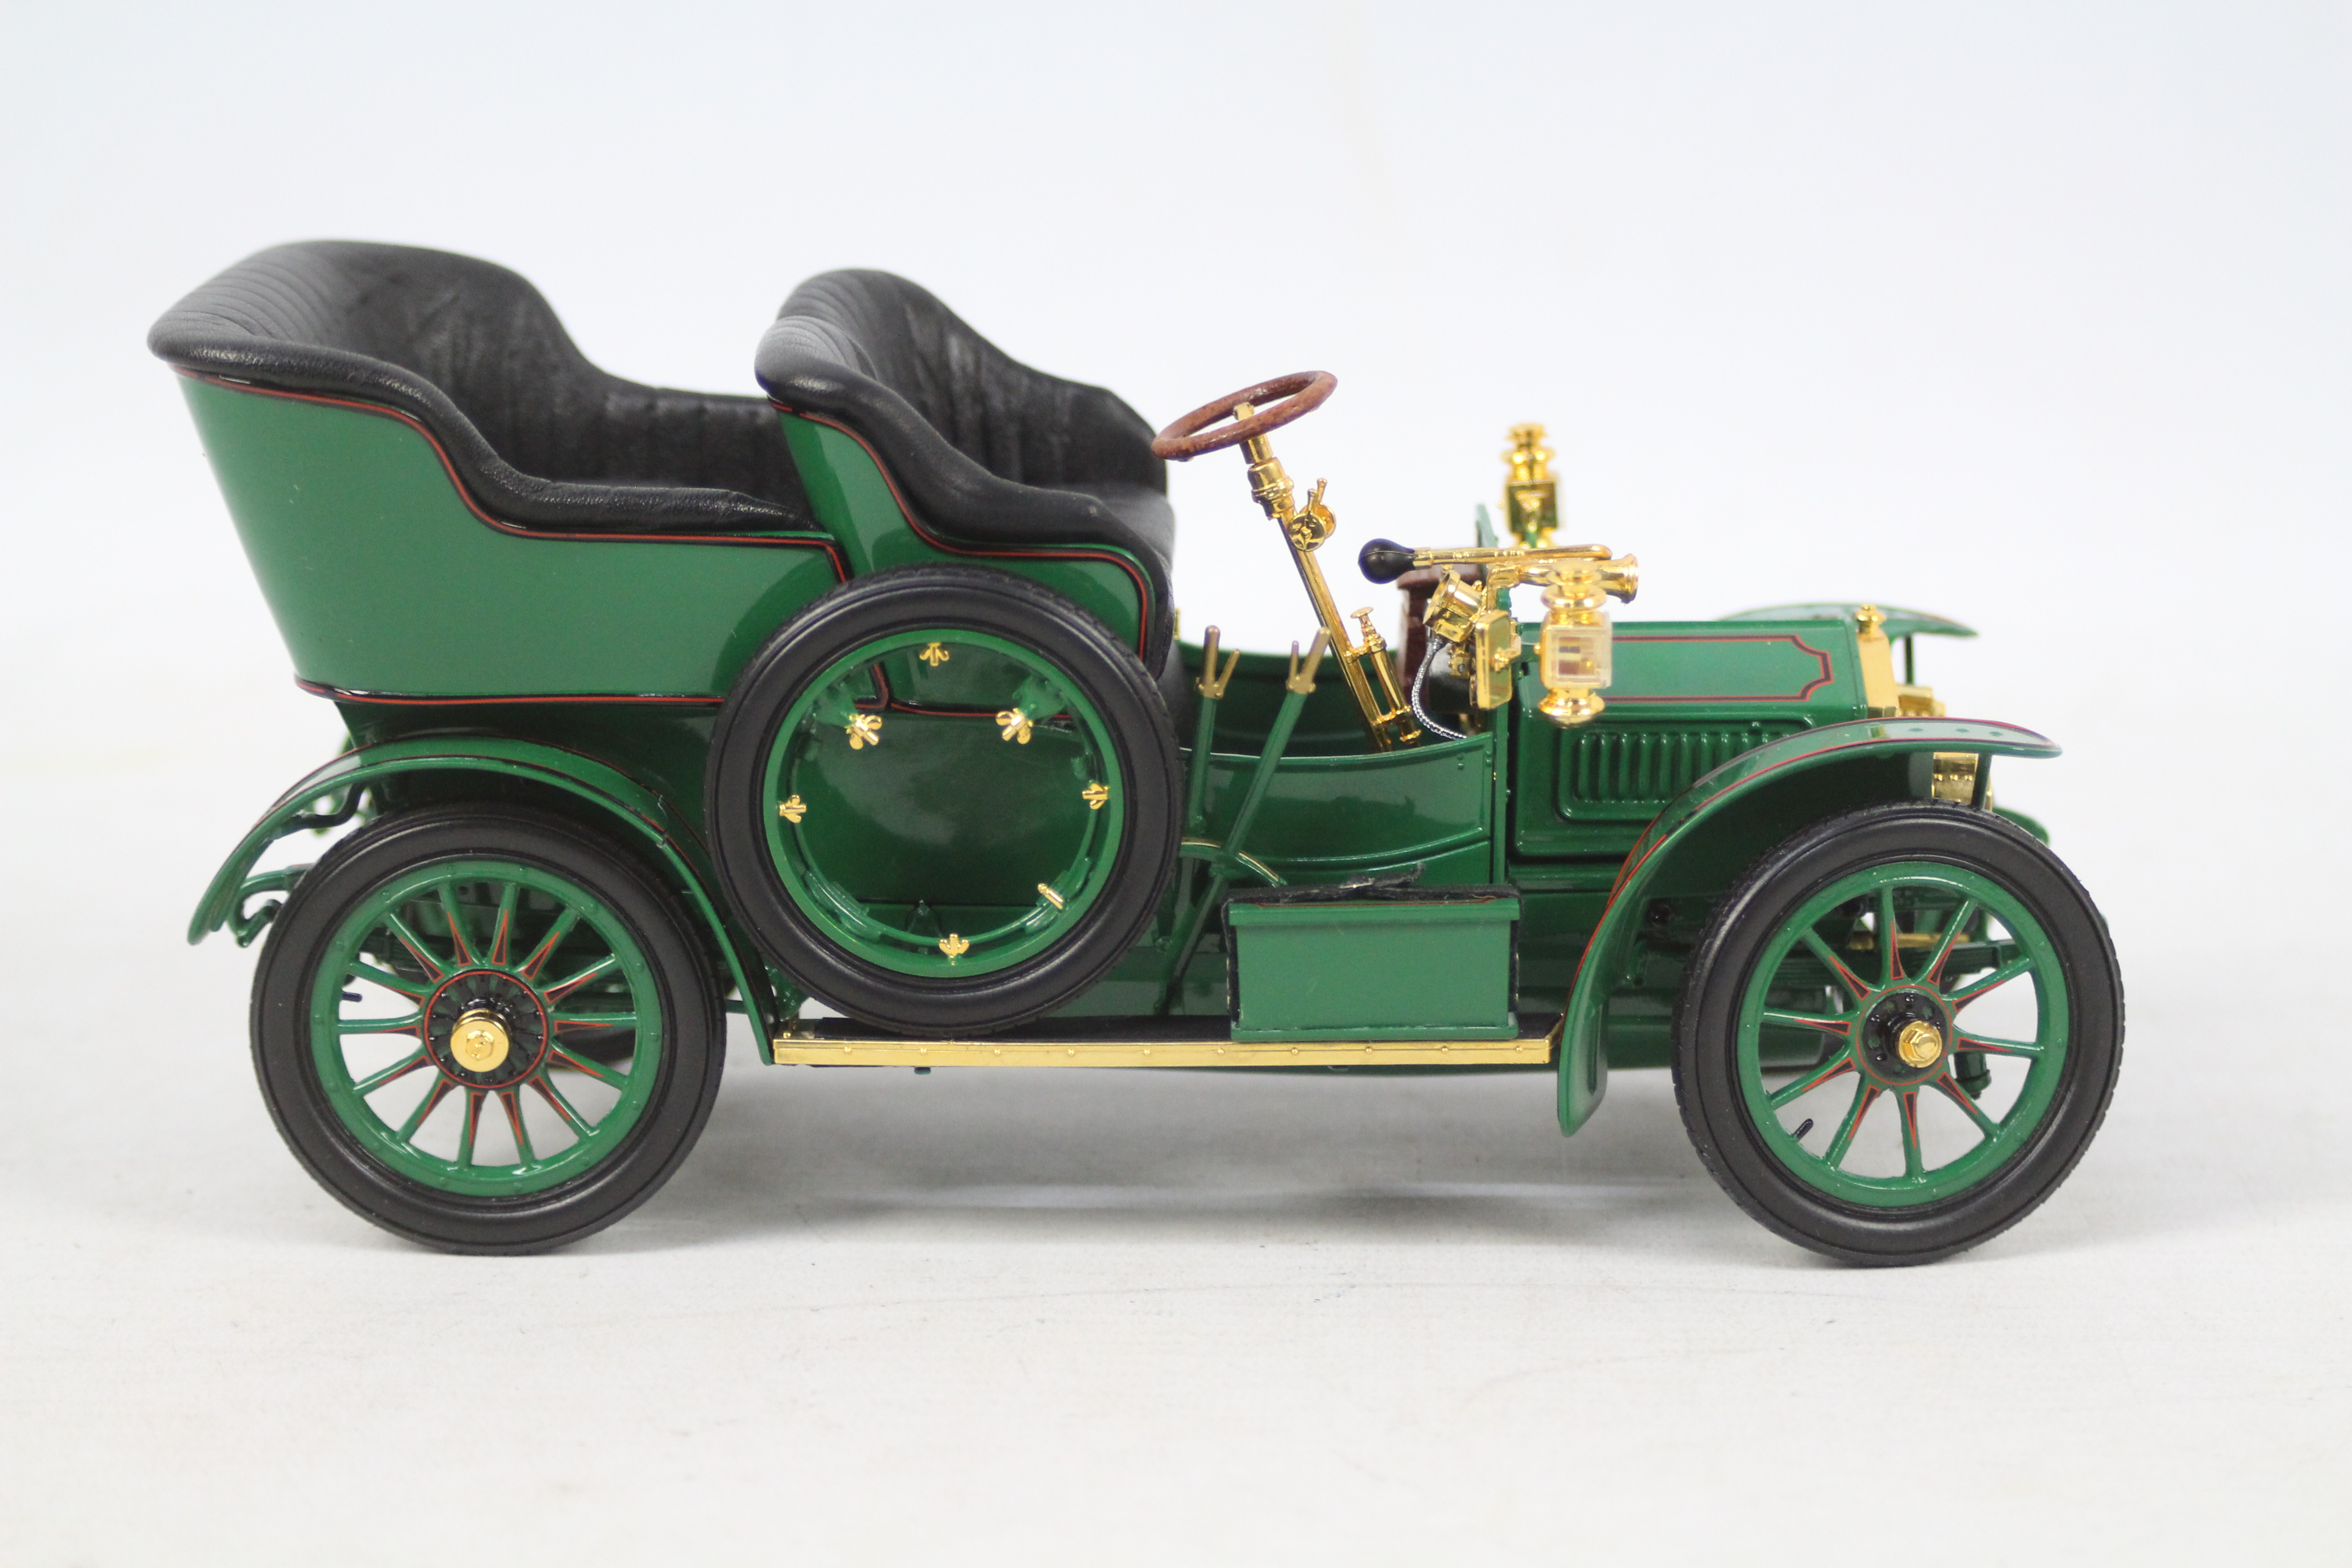 Franklin Mint - A 1:24 scale 1905 Rolls Royce in green livery. - Image 2 of 4